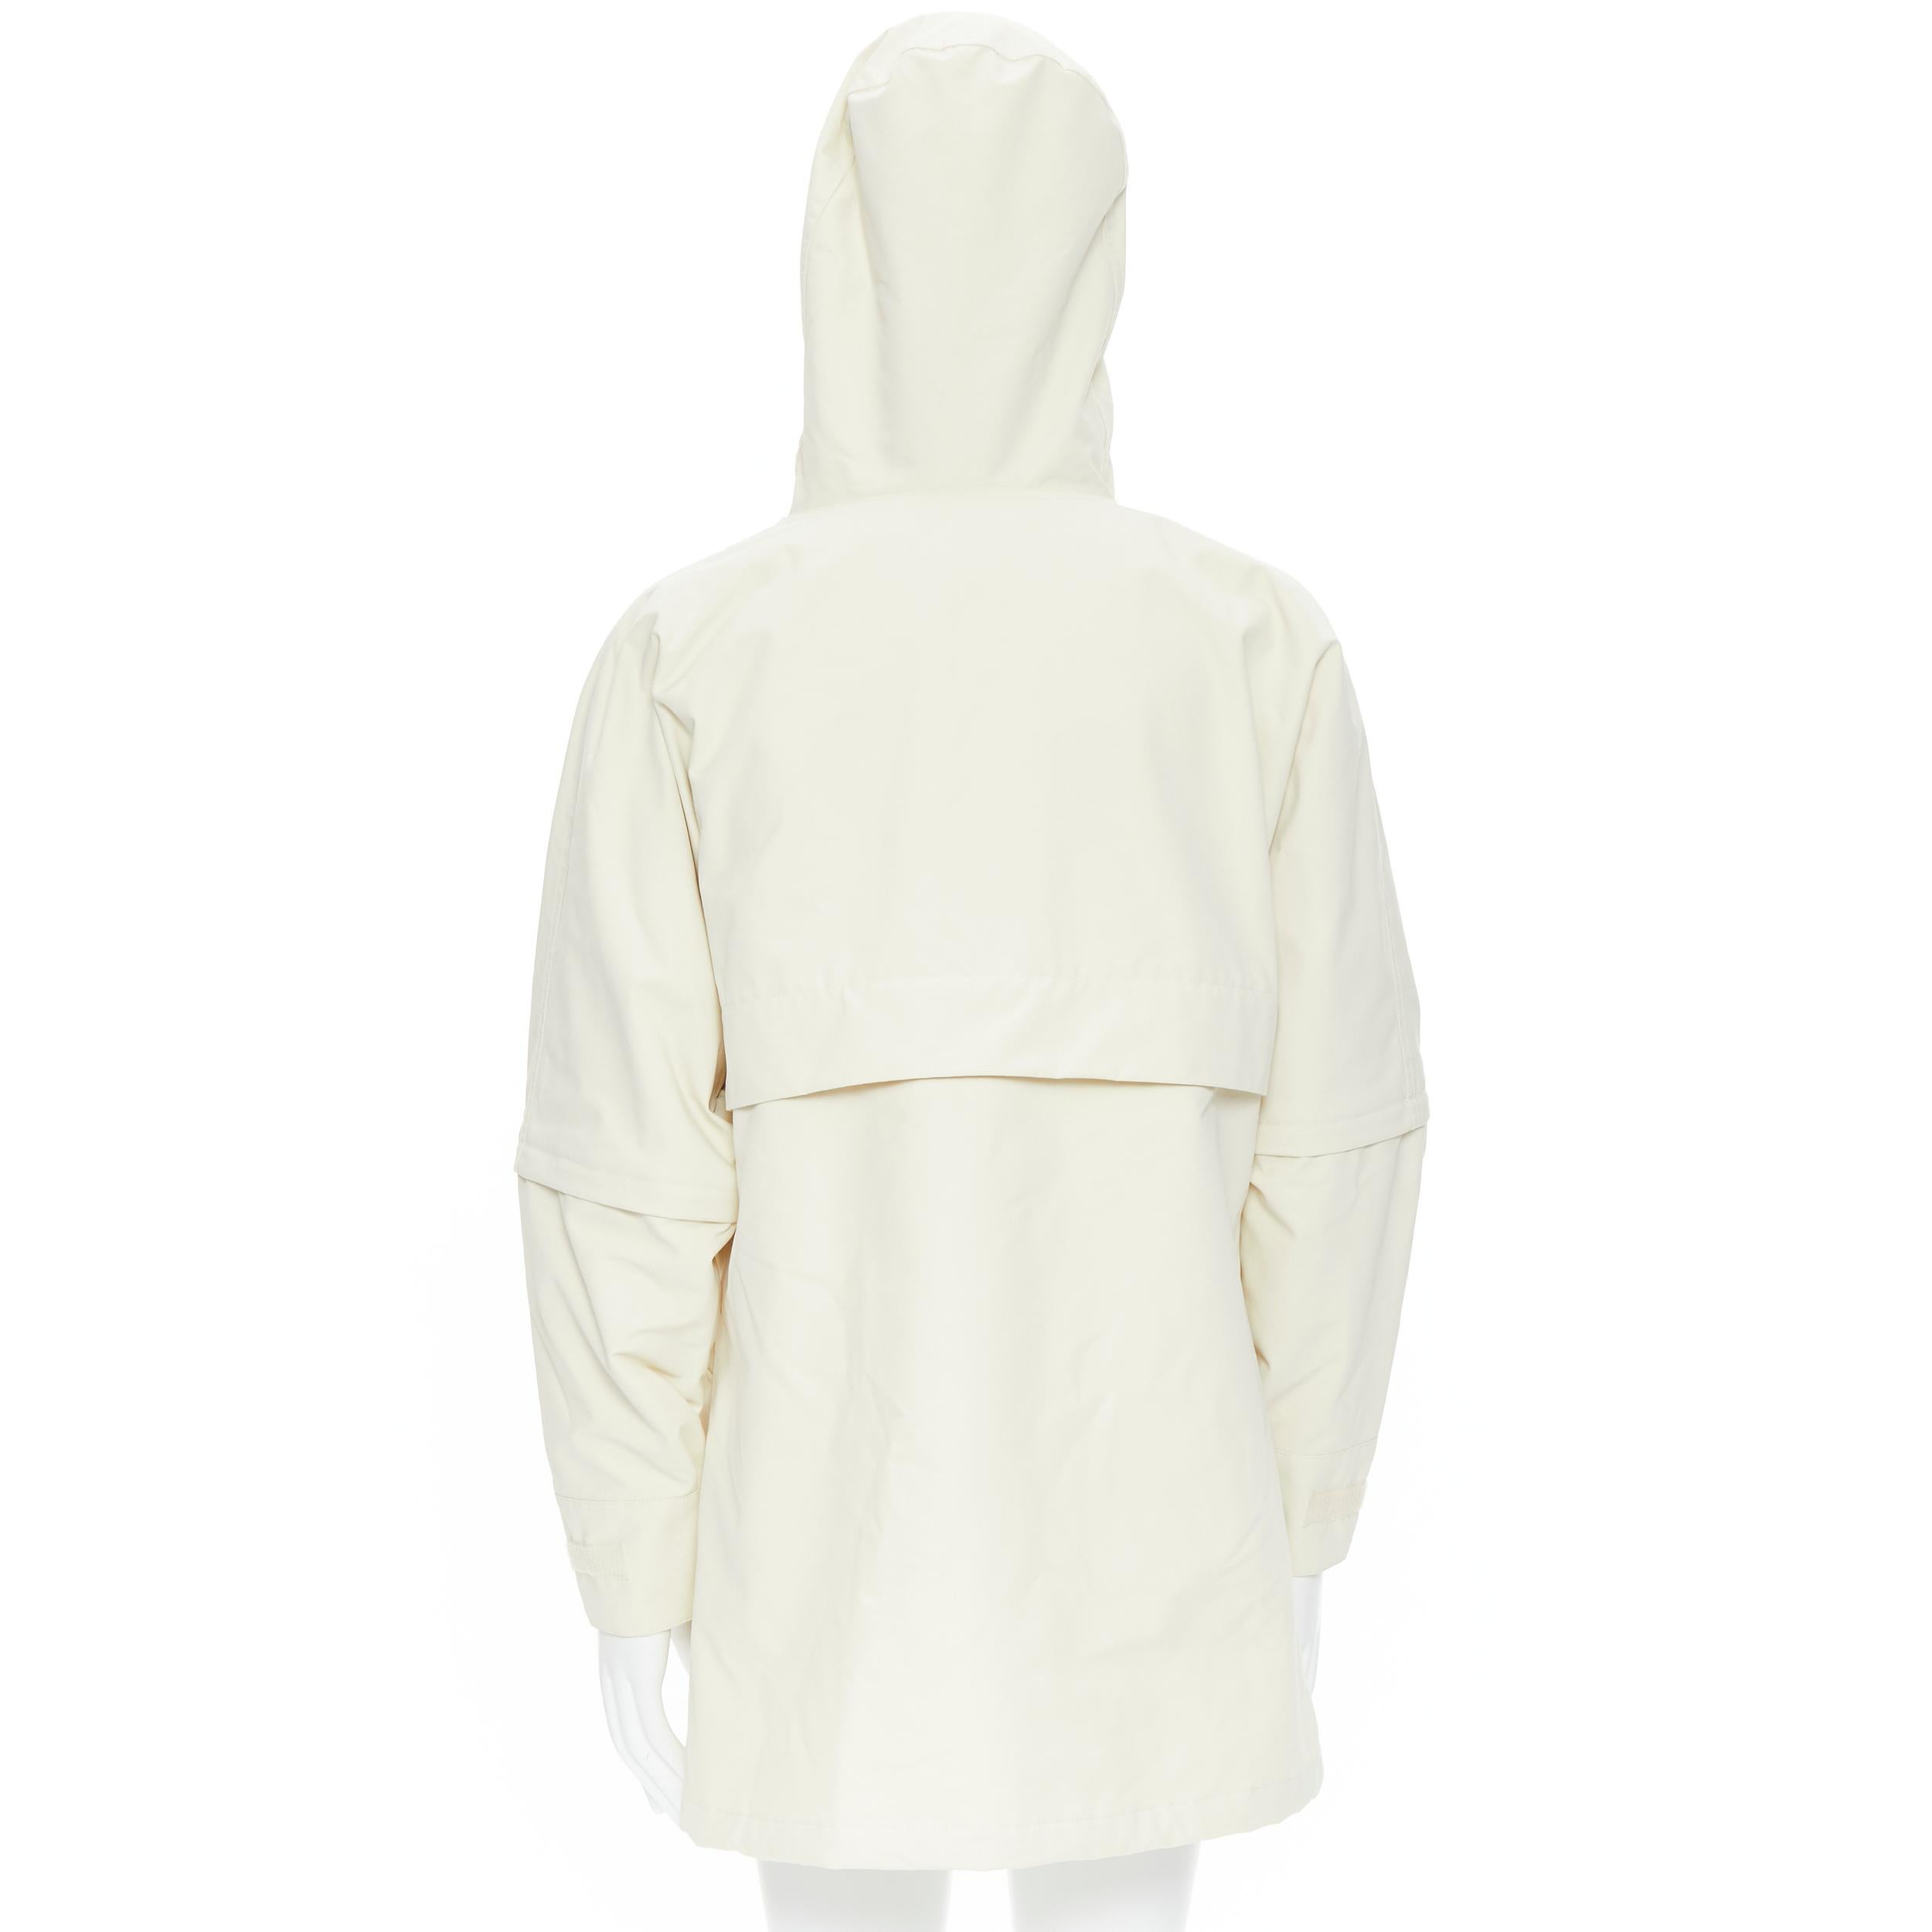 north face pullover coat